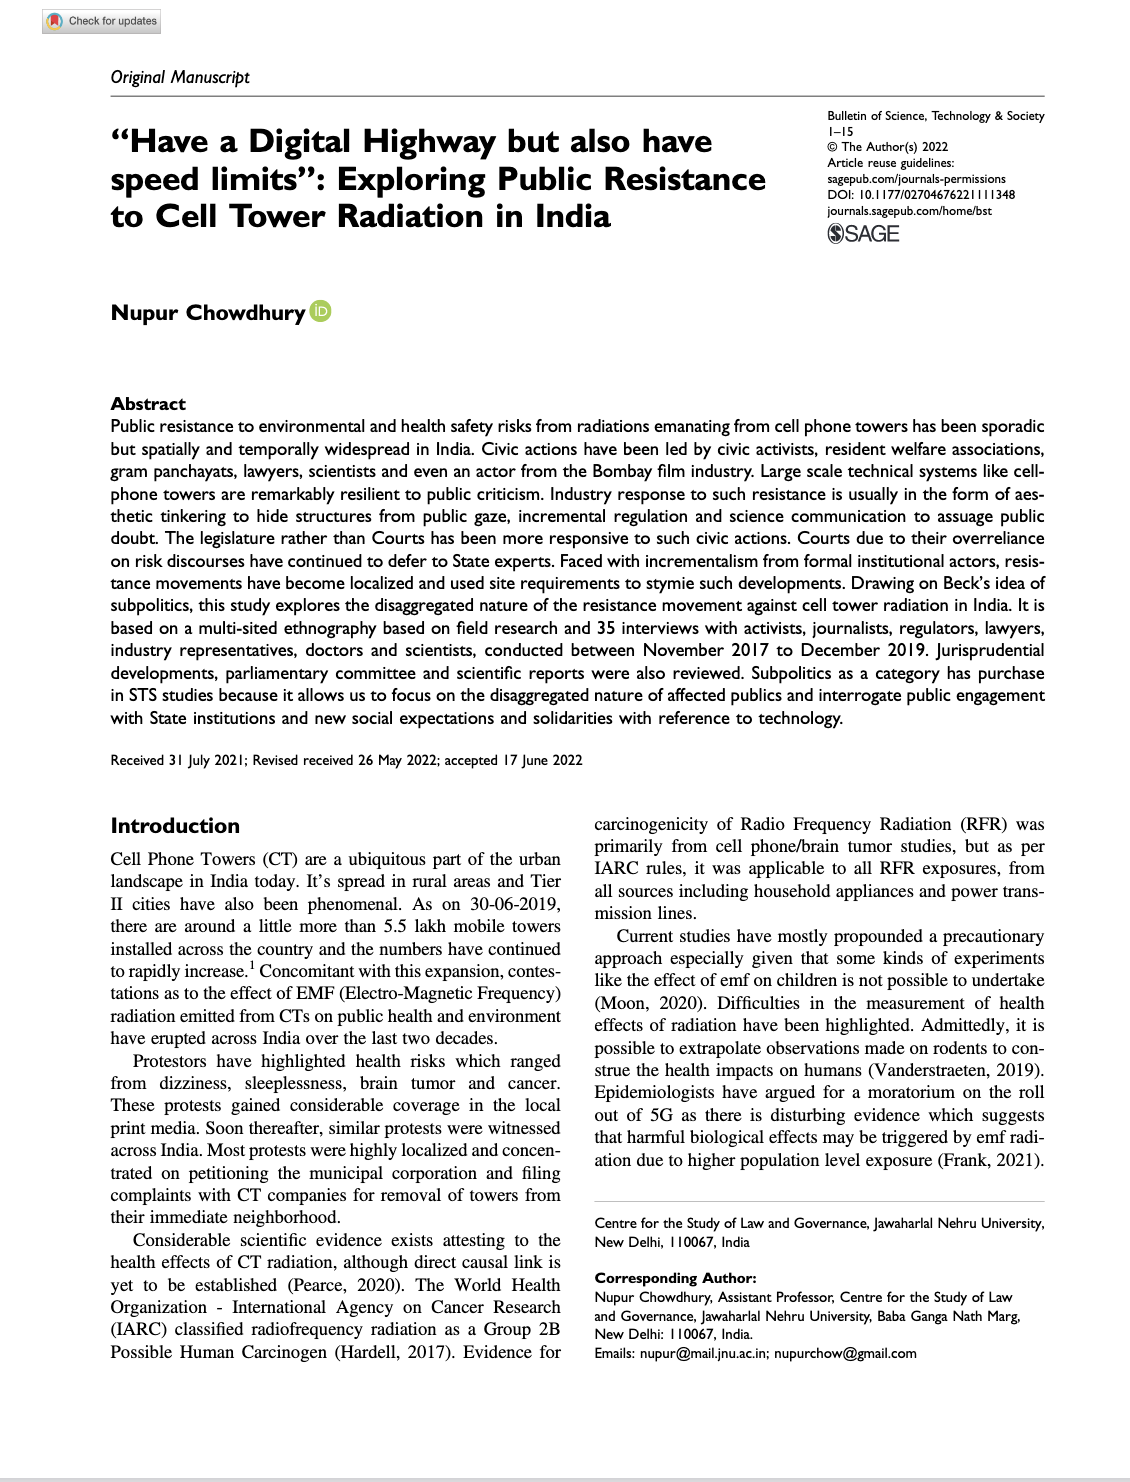 Exploring Public Resistance to Cell Tower Radiation in India